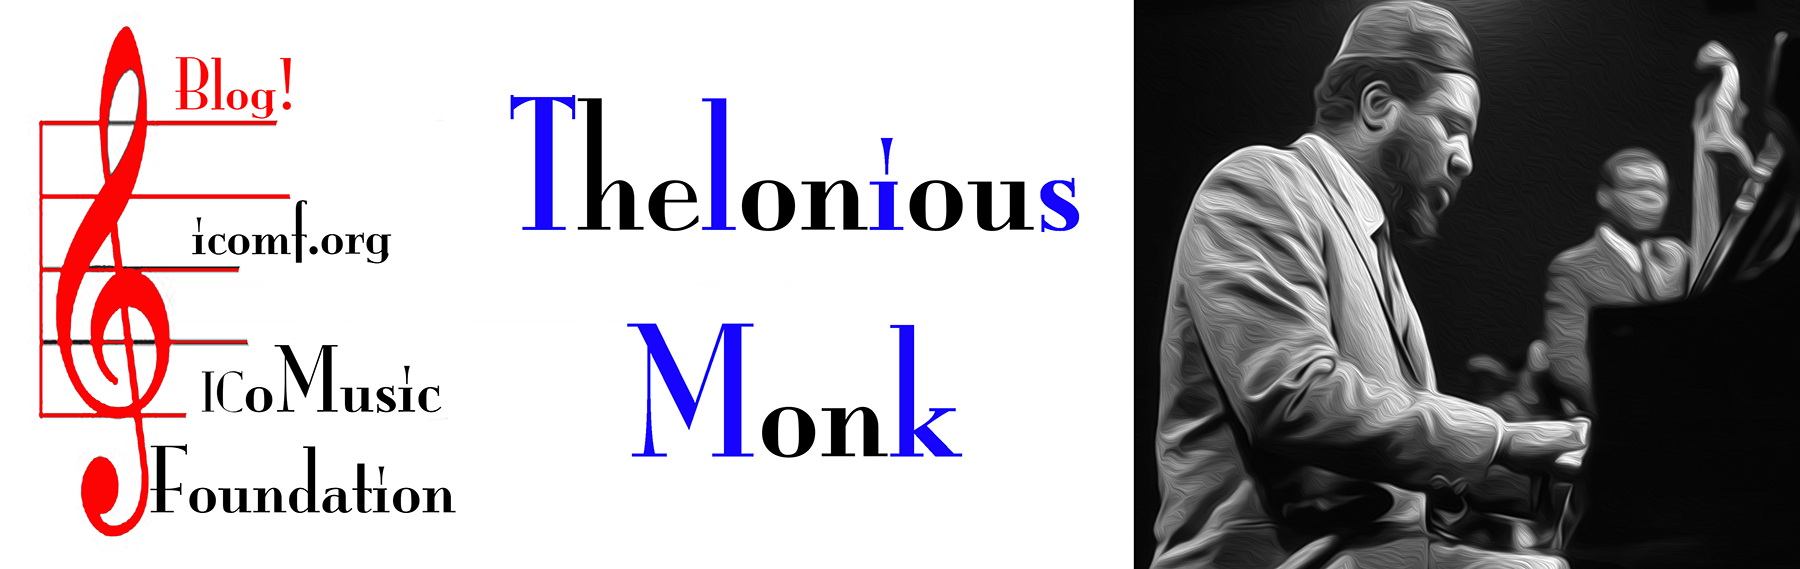 Thelonious Monk at the piano live